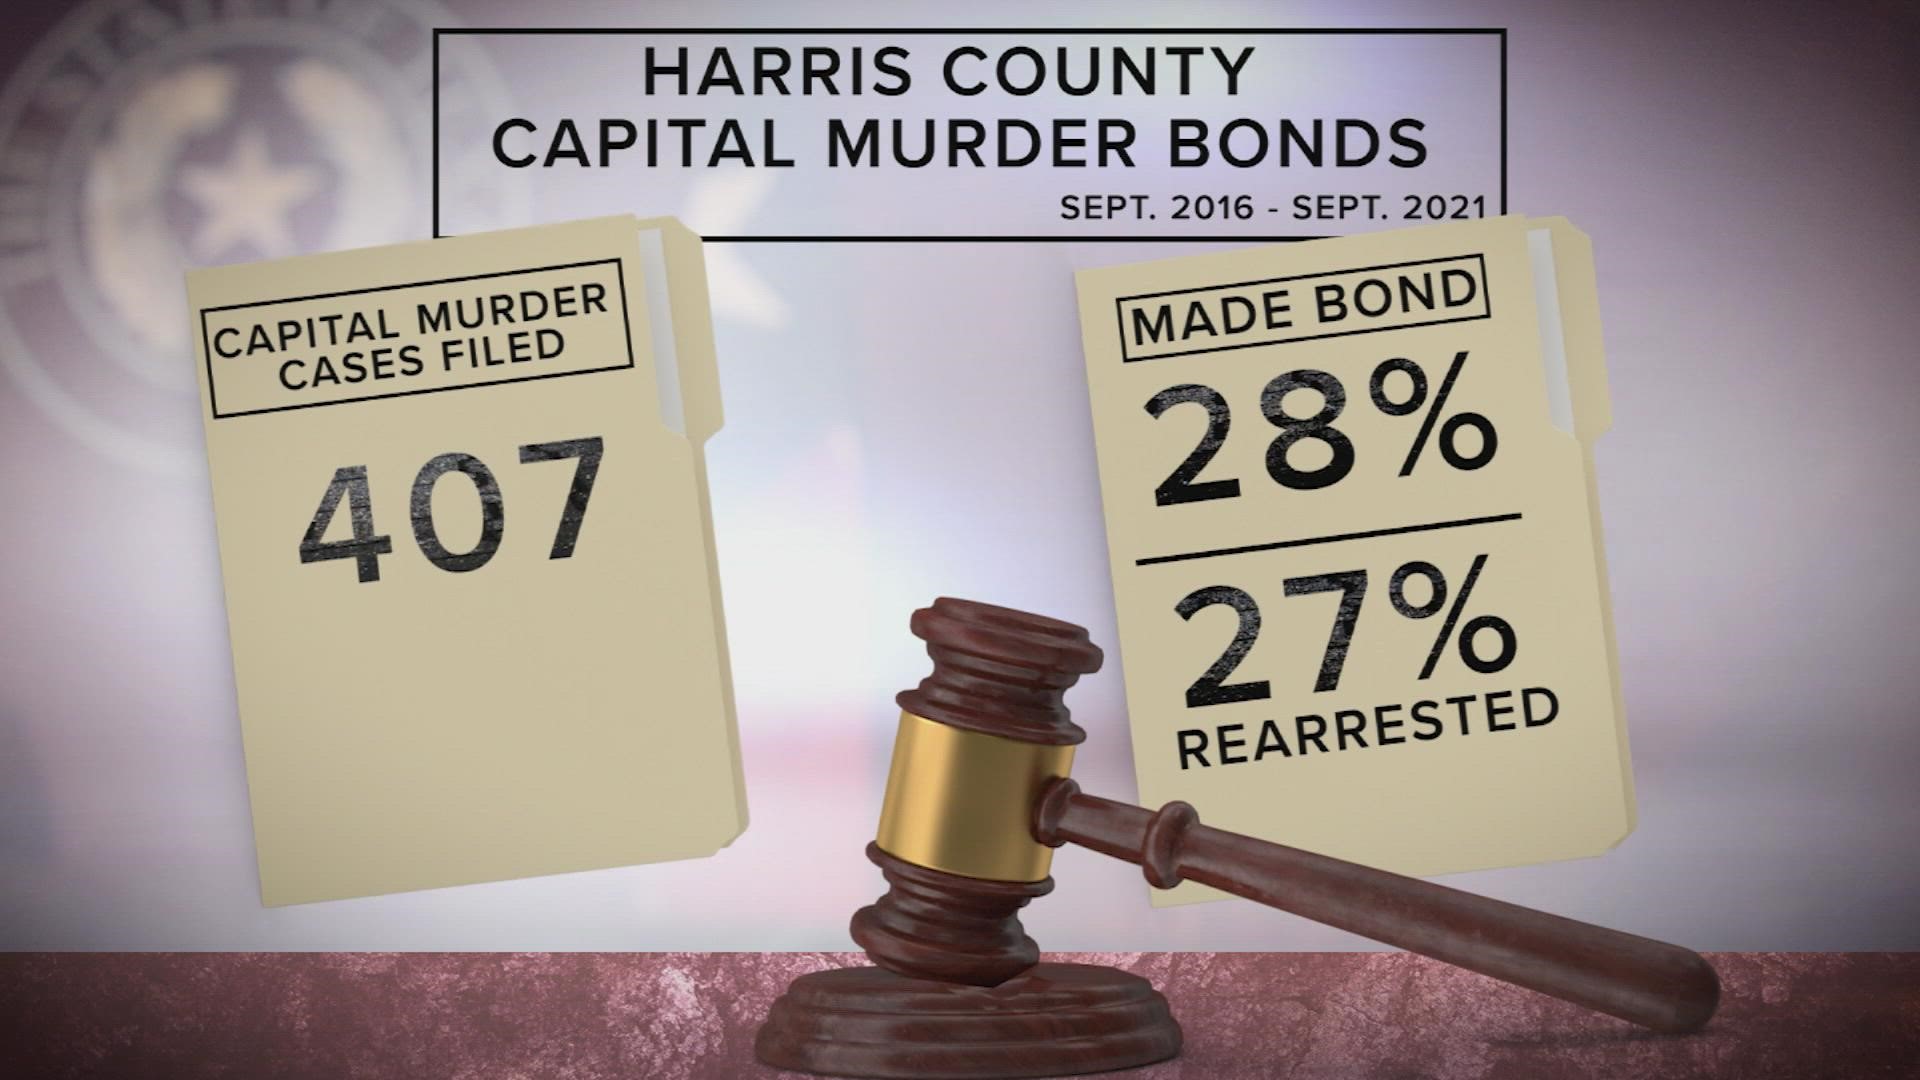 KHOU 11 Investigates analyzed 407 capital murder charges filed in Harris County between September 2016 and September 2021.